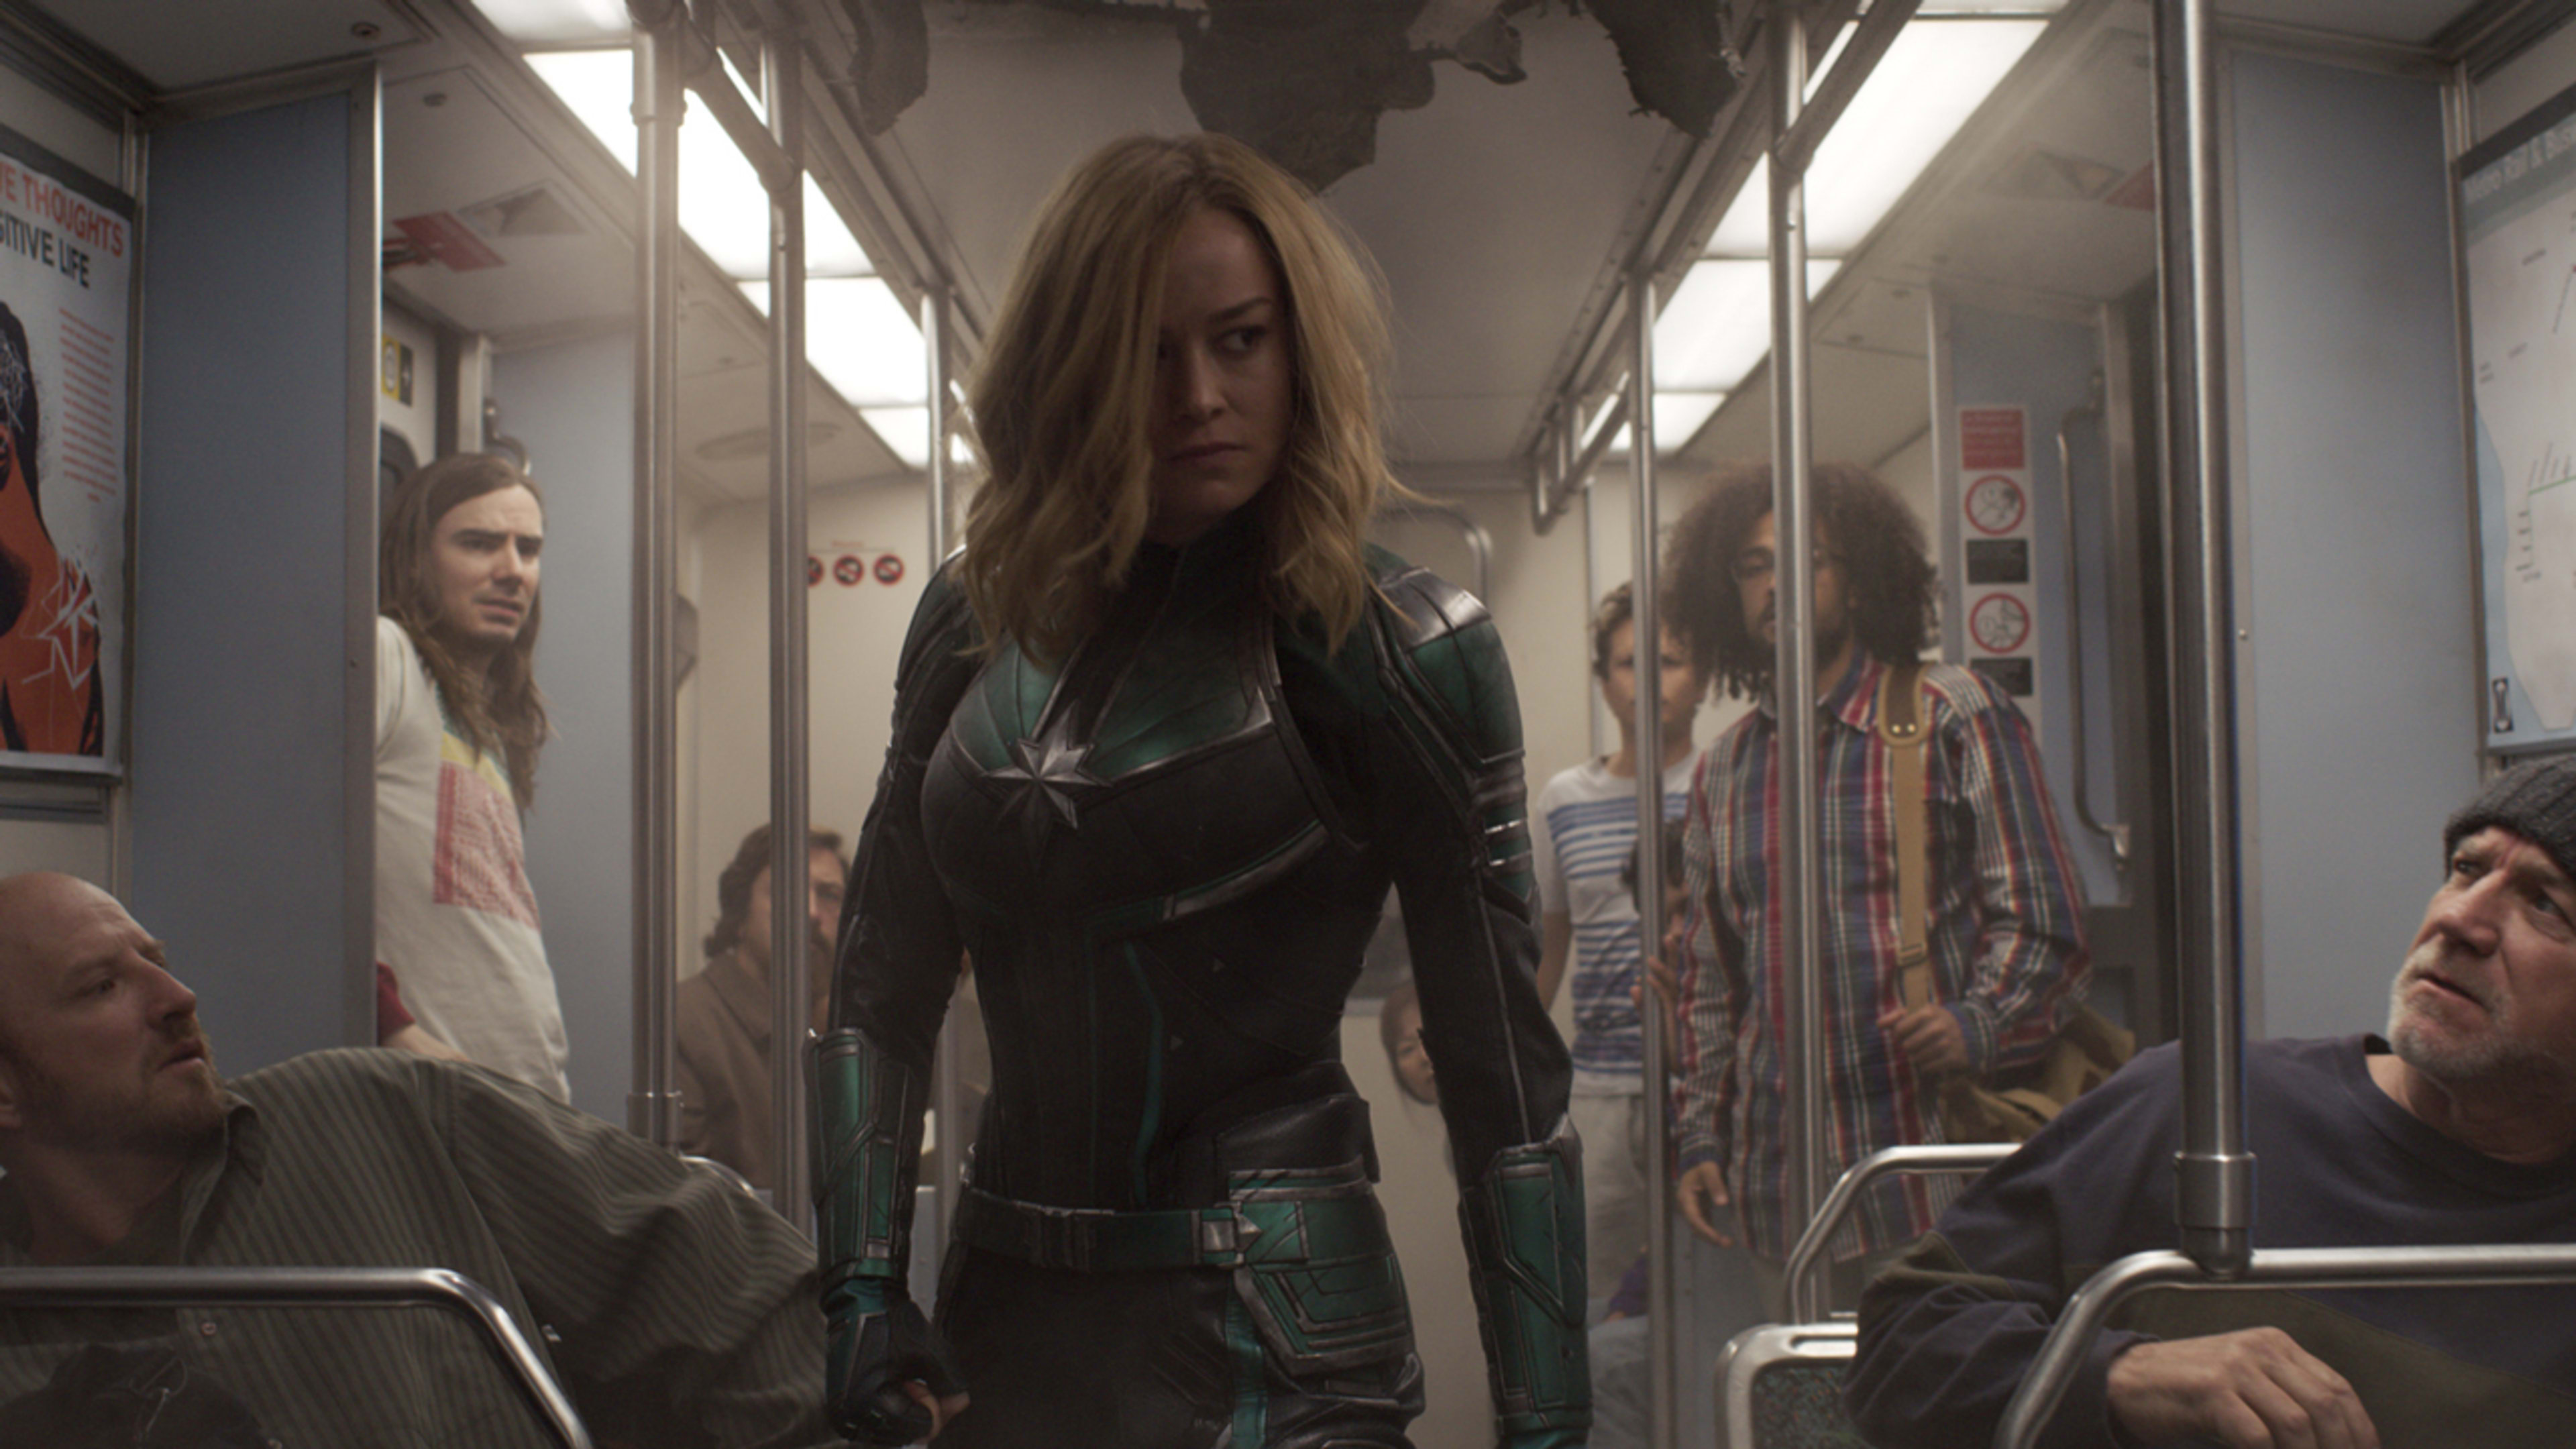 You won’t believe why this conservative columnist thinks Captain Marvel is unrealistic